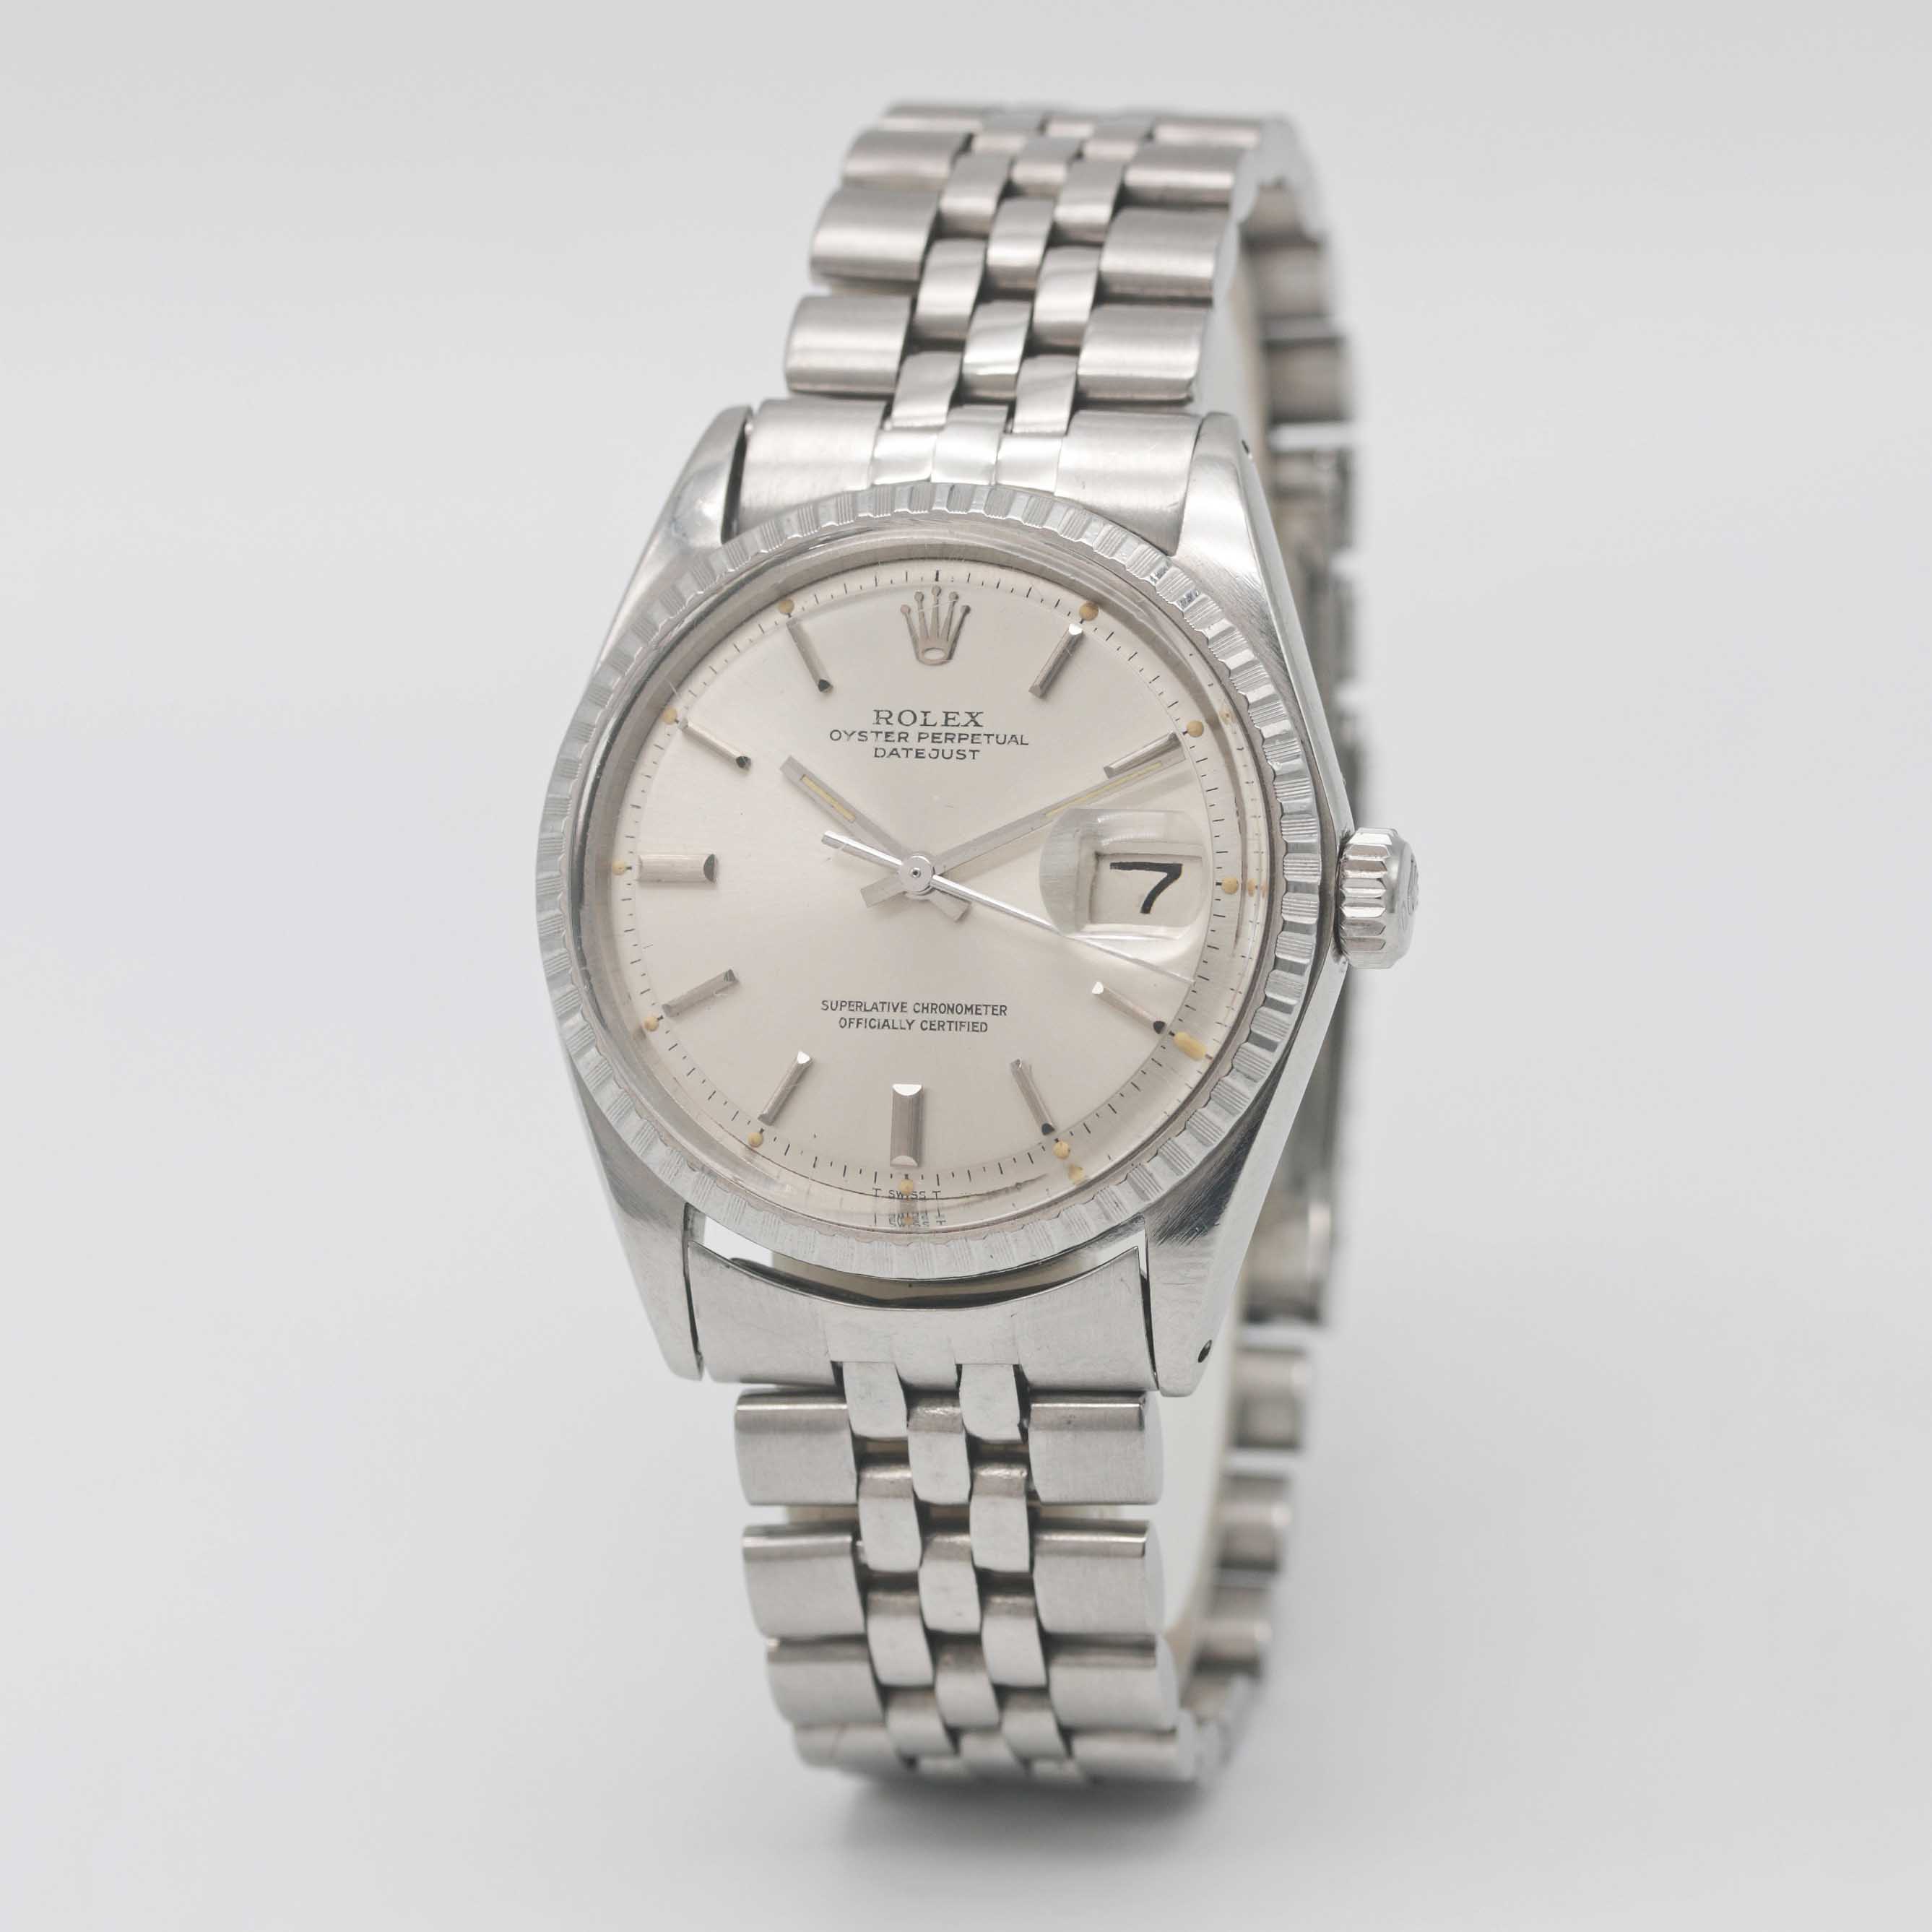 A GENTLEMAN'S STAINLESS STEEL ROLEX OYSTER PERPETUAL DATEJUST BRACELET WATCH CIRCA 1970, REF. 1603 - Image 4 of 12